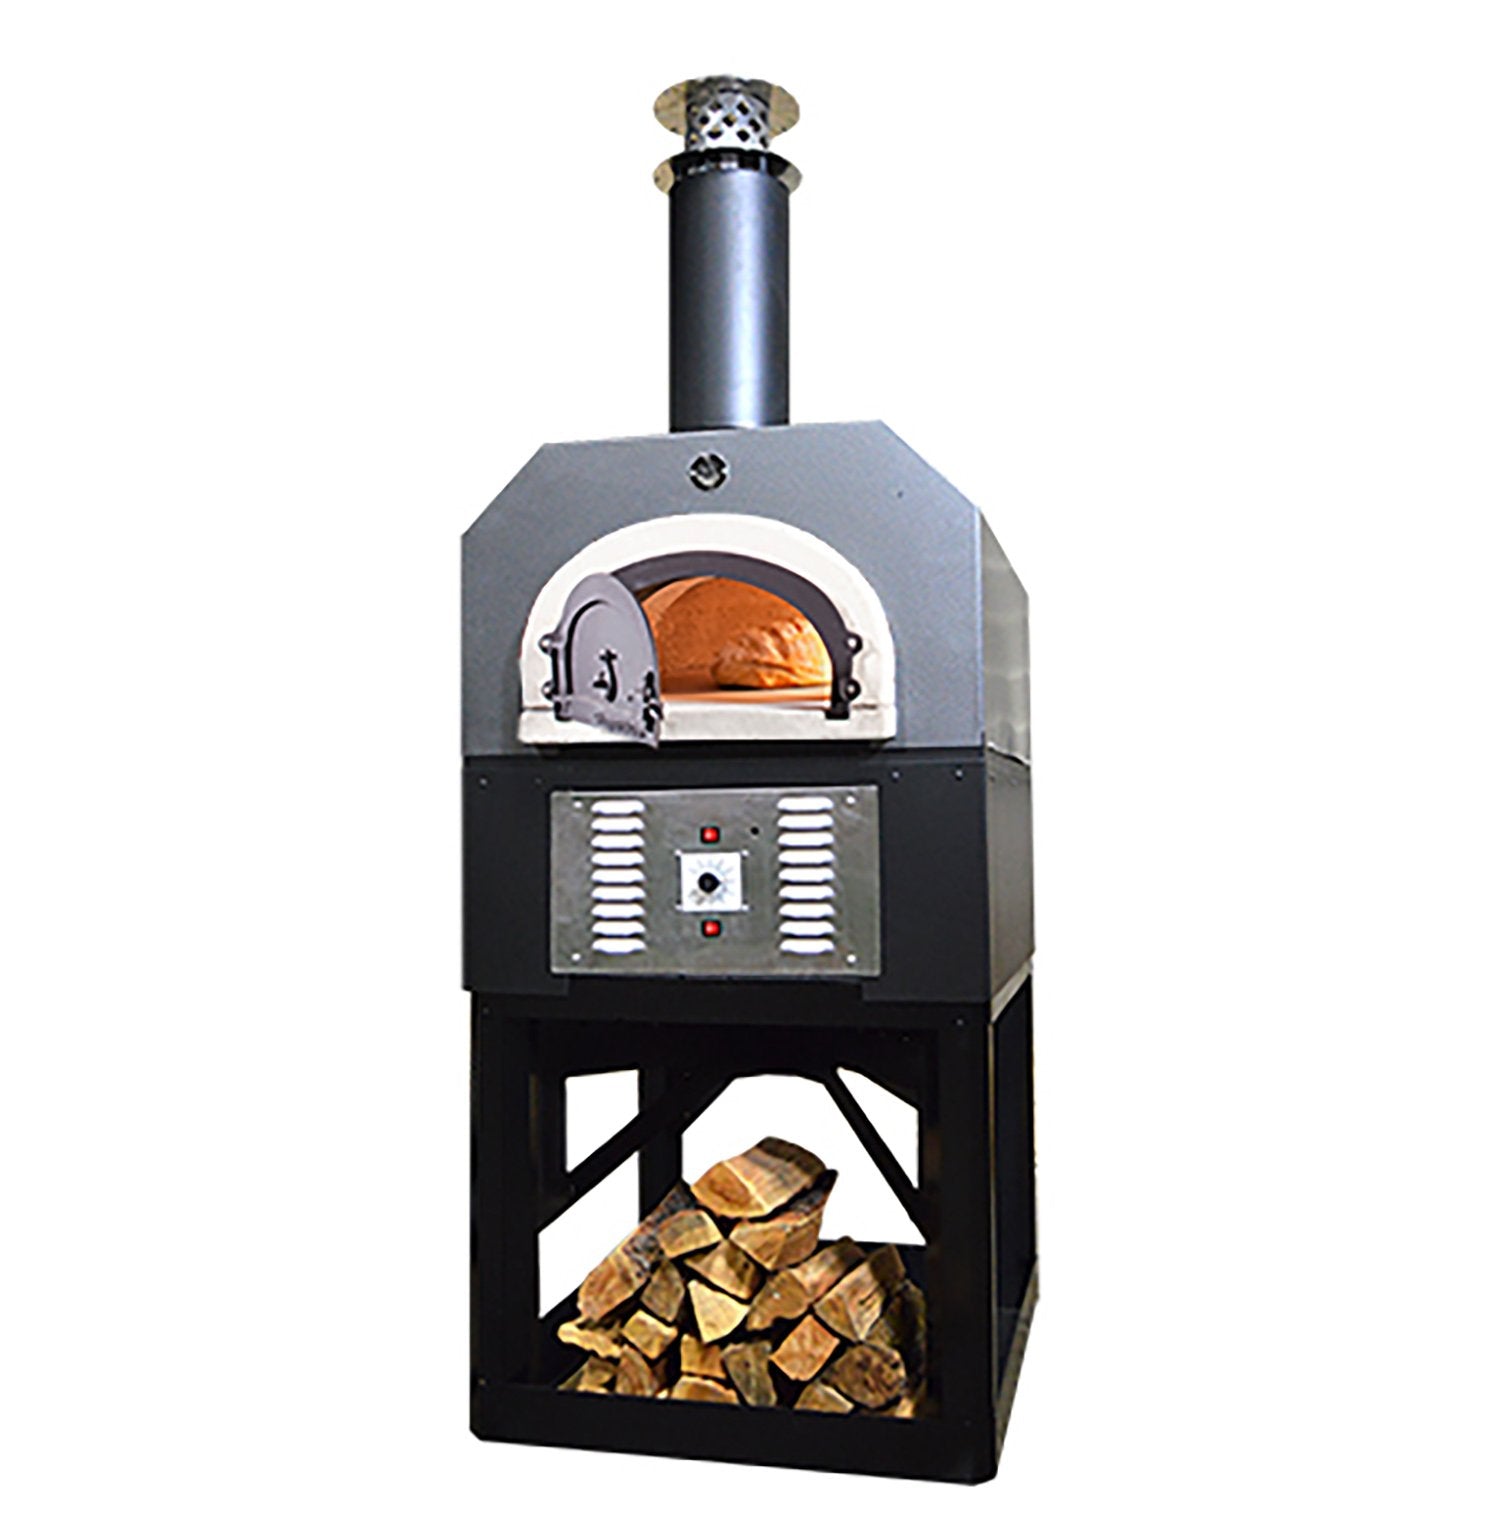 Chicago Brick Oven 750 Hybrid Dual Fuel Gas or Wood Stand for Residential Pizza Oven